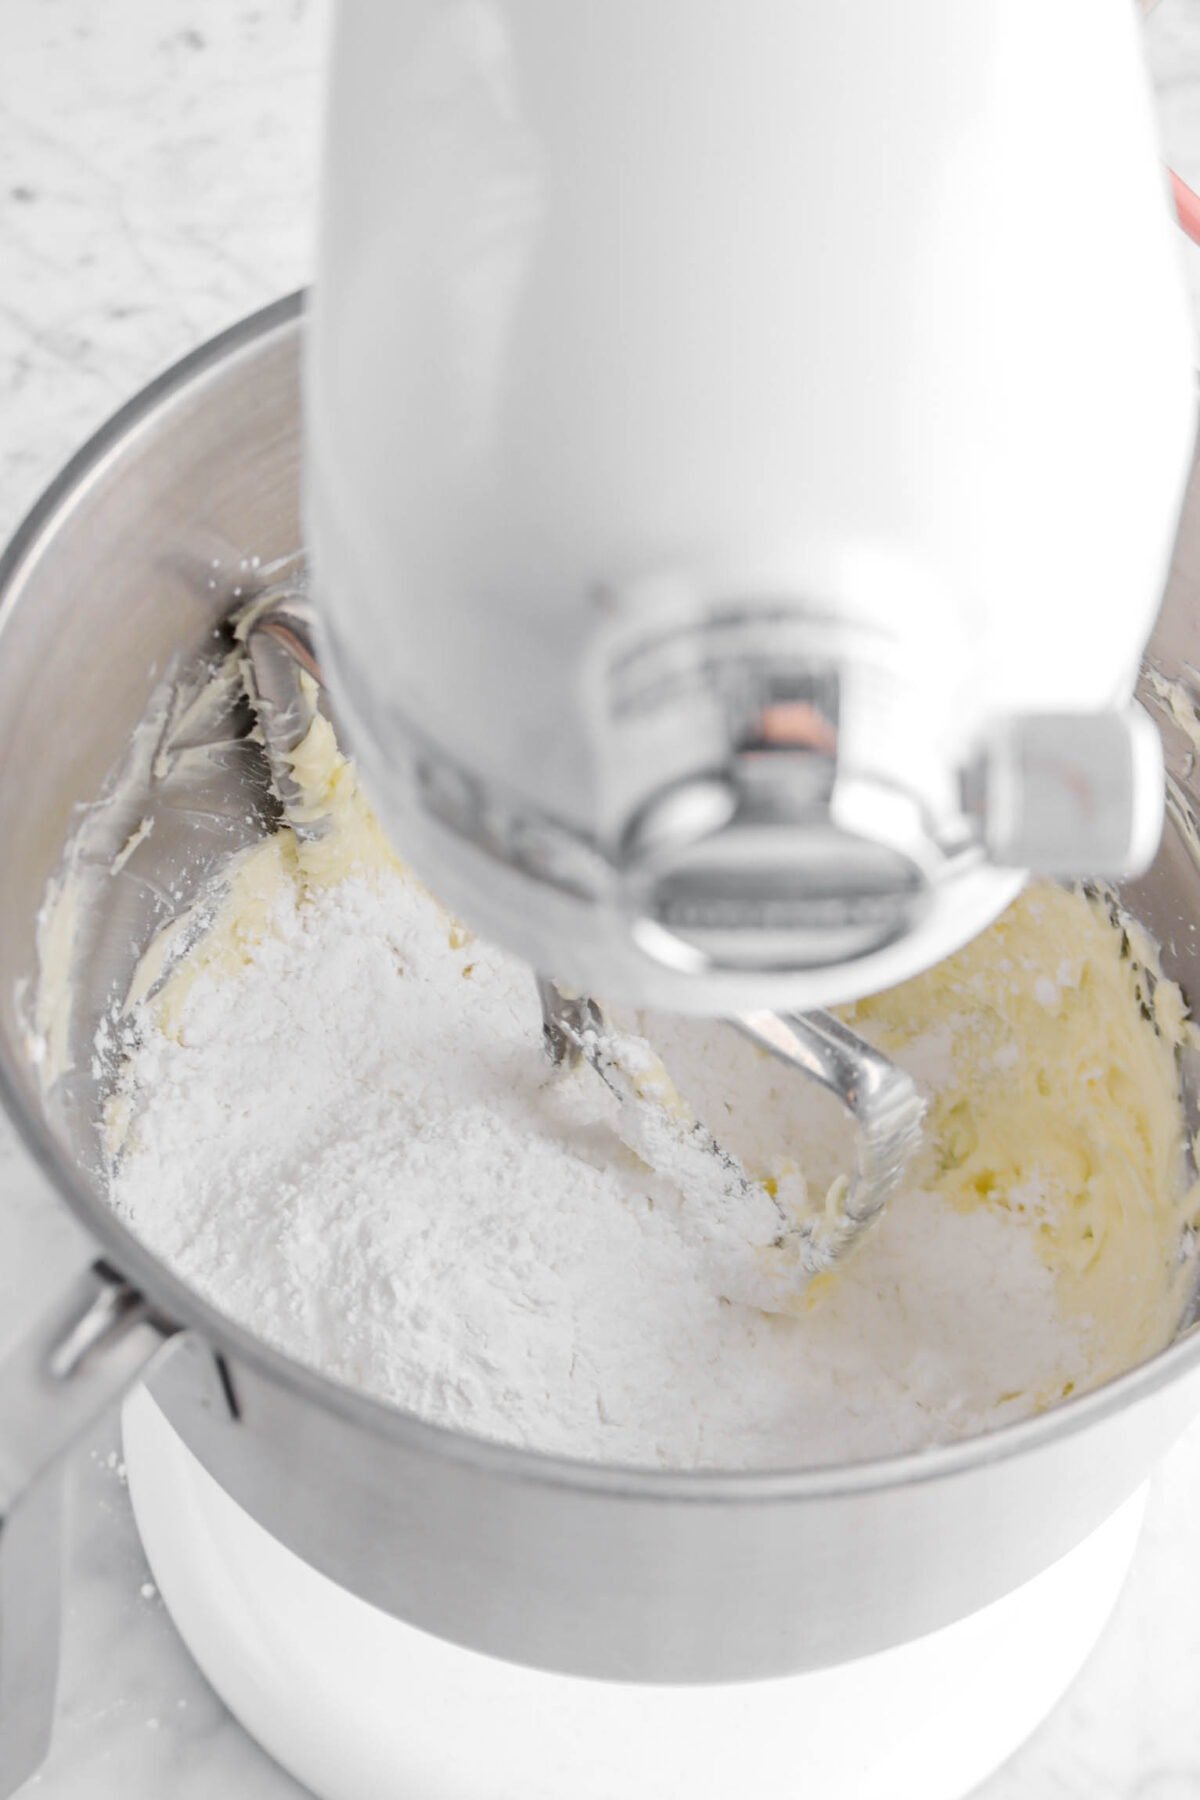 powdered sugar added to creamed butter